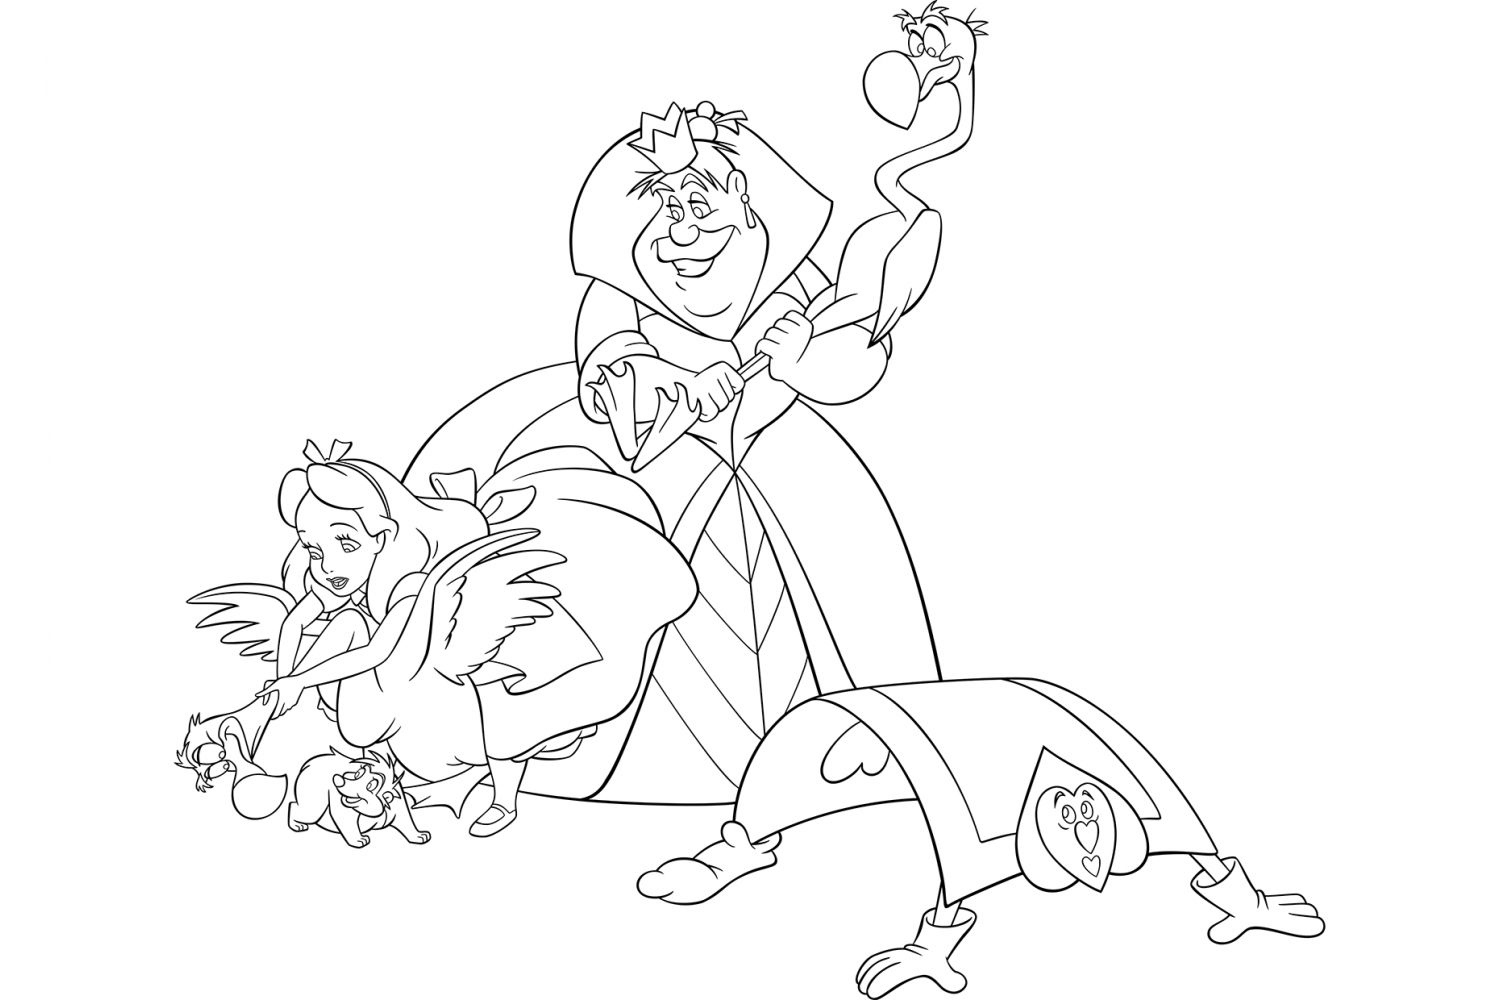 Alice in Wonderland – Coloring Pages for print